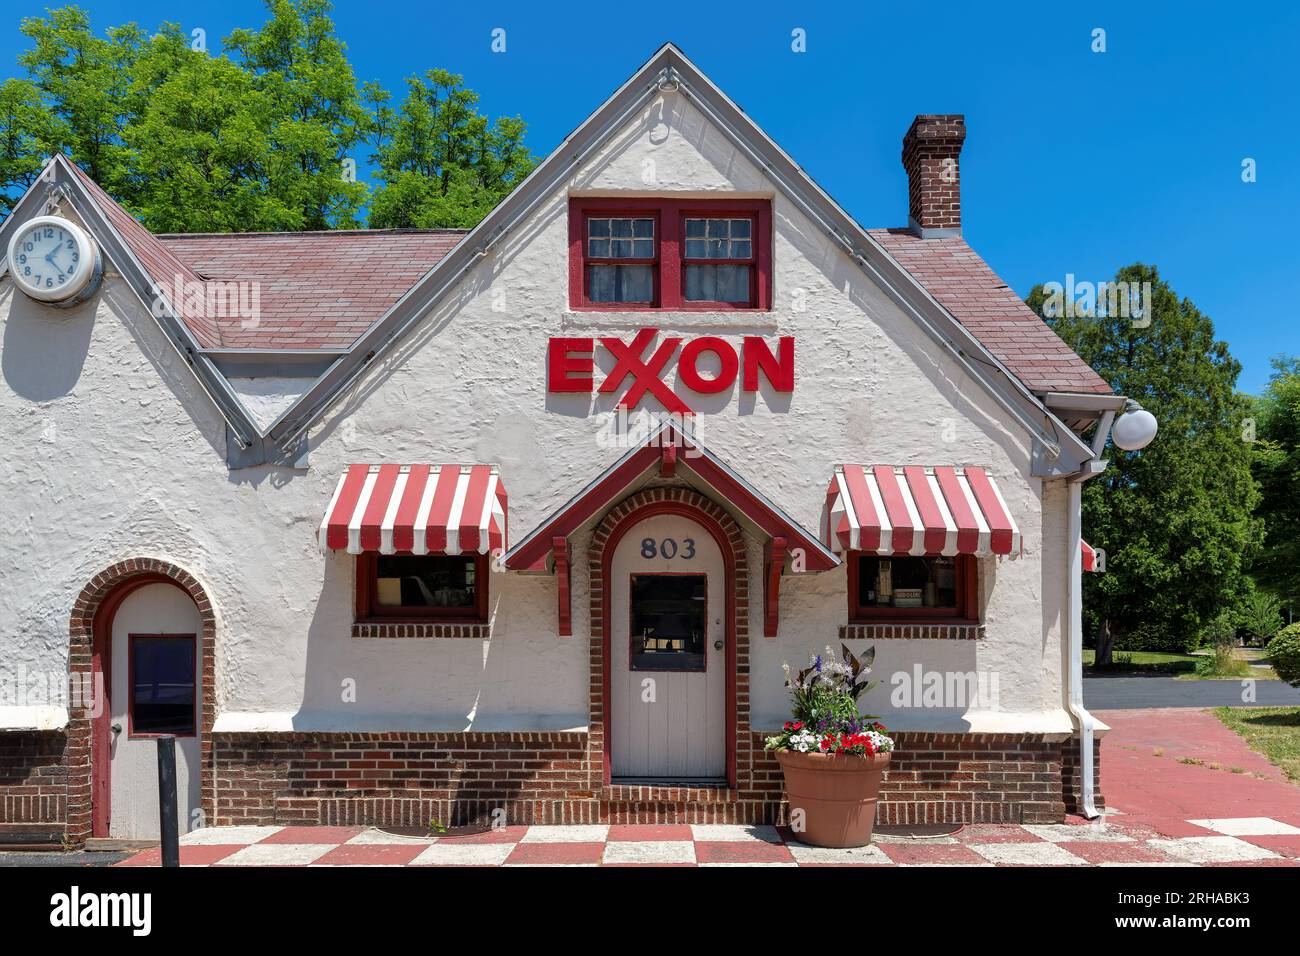 Exterior view of an Exxon old gas station Stock Photo